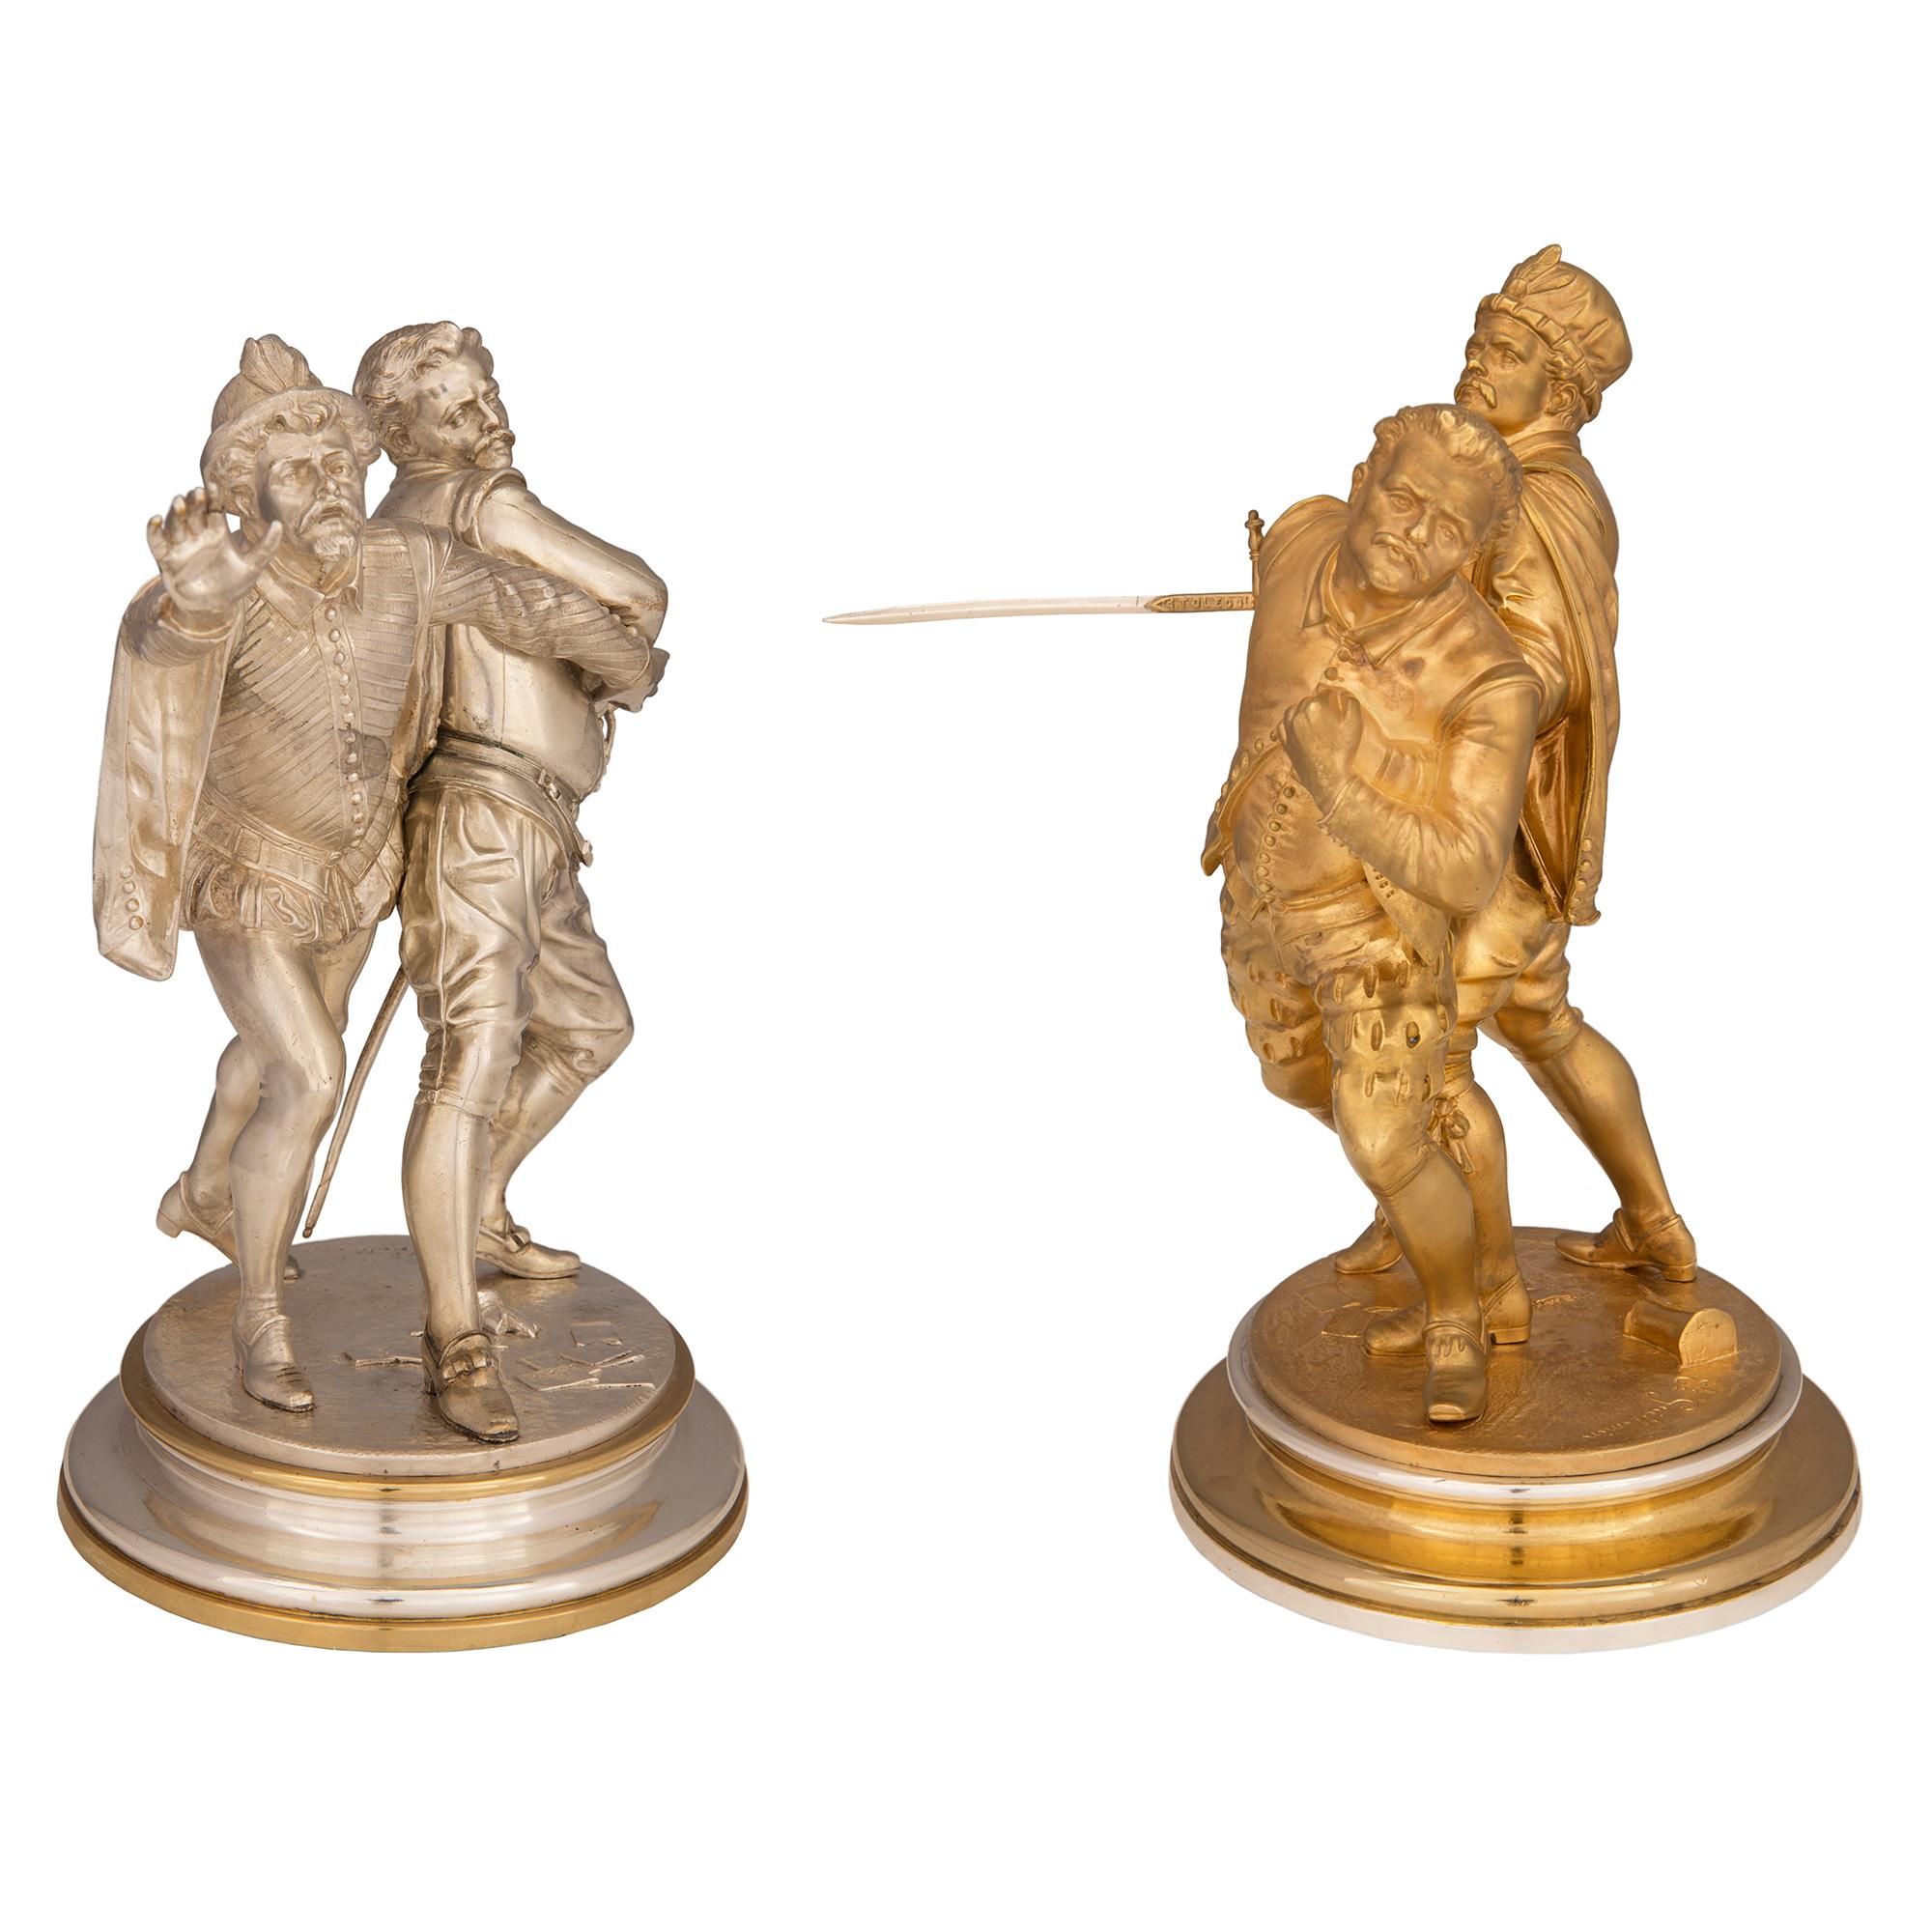 A Continental 19th century bronze & ormolu statues by Emile Guillemin In Good Condition For Sale In West Palm Beach, FL